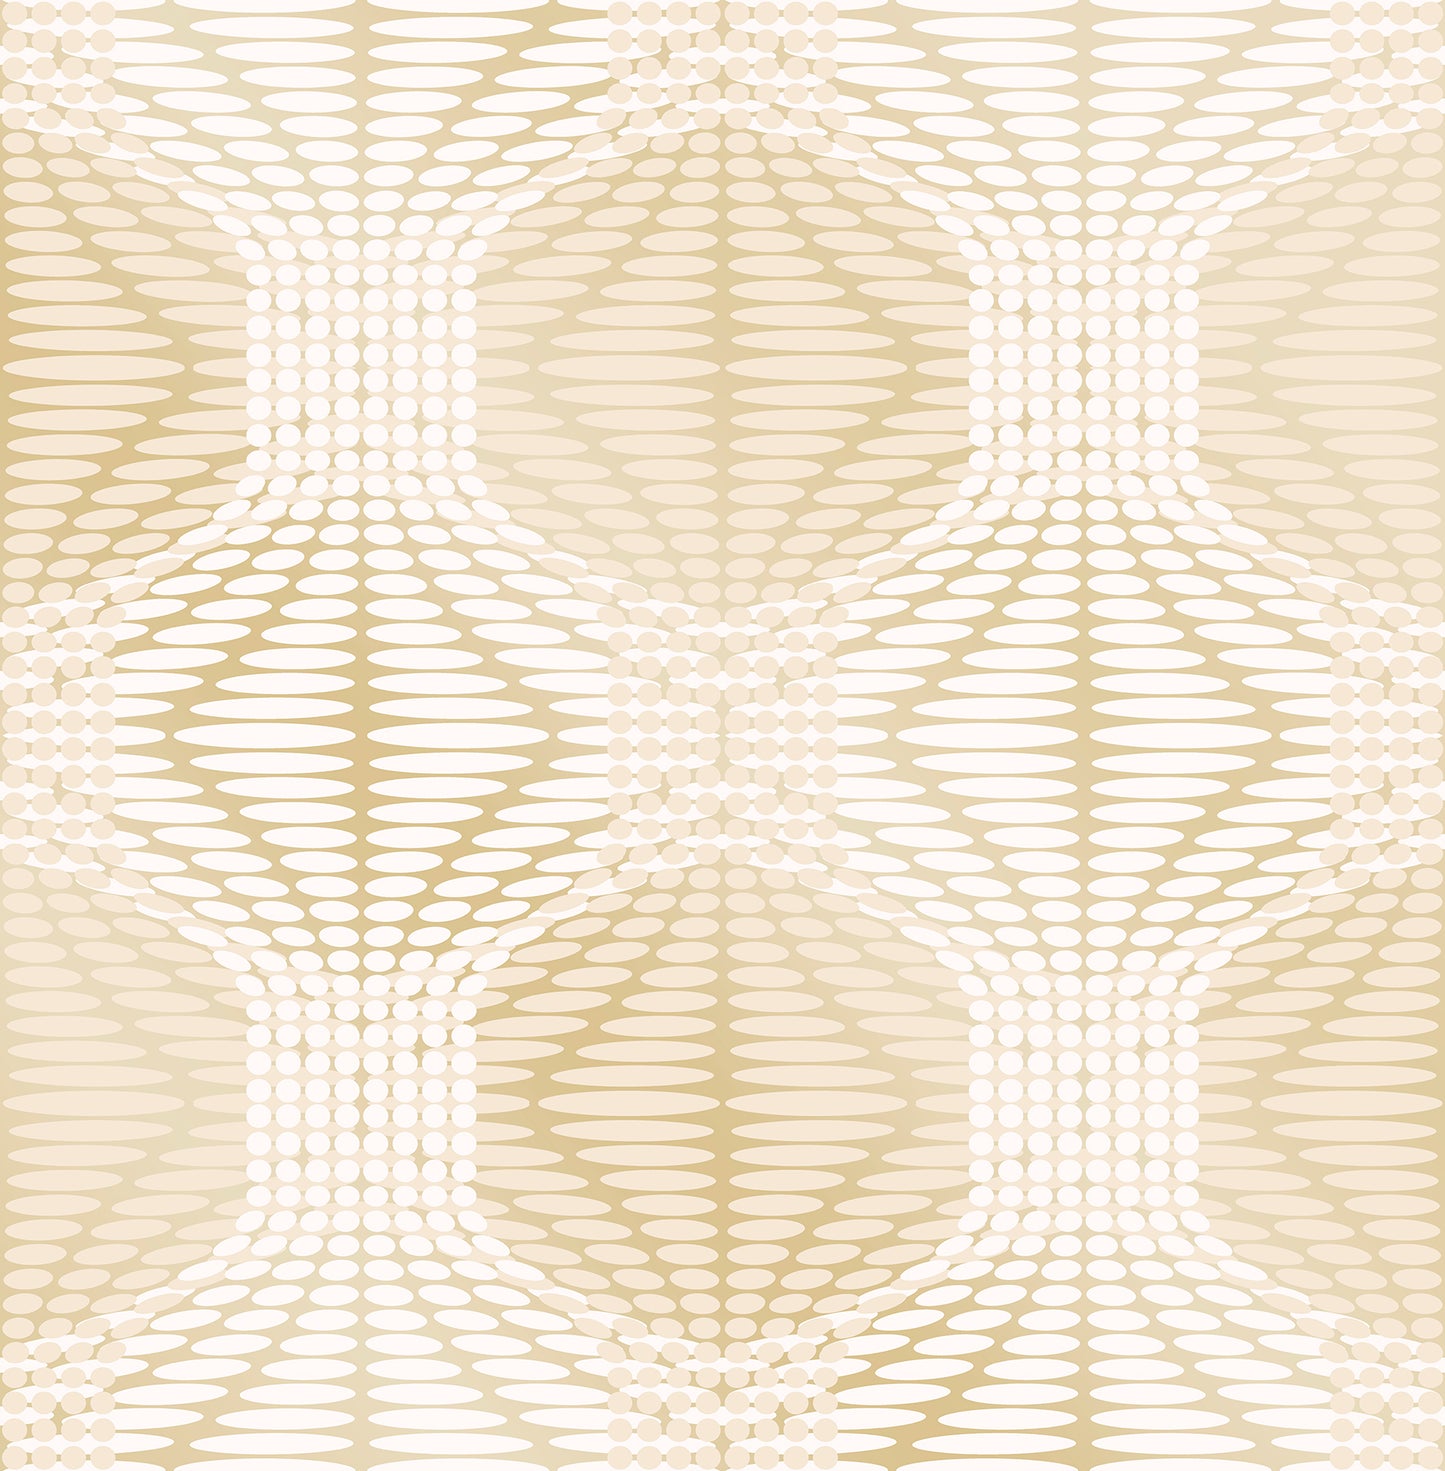 Looking for 2697-22633 Optic Gold Geometric A-Street Prints Wallpaper